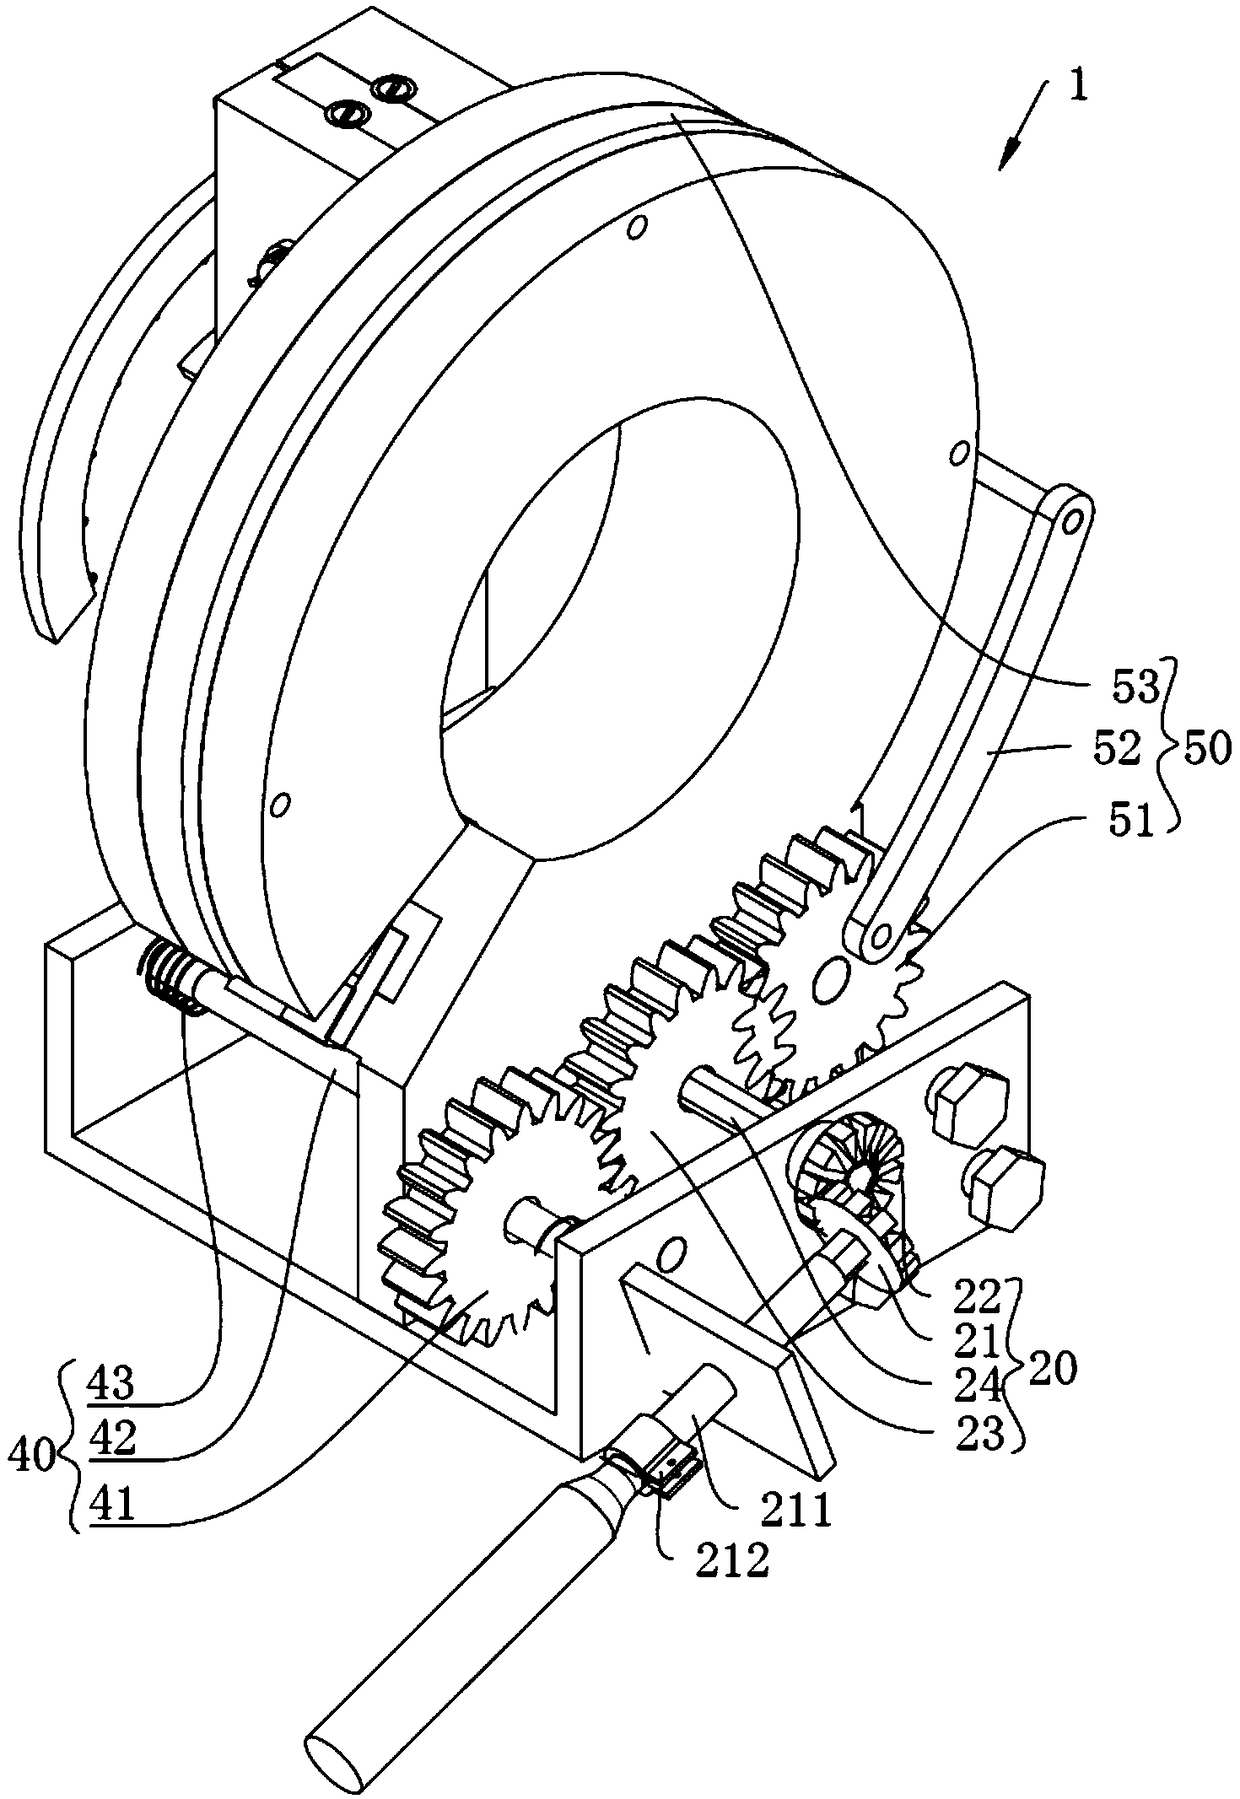 Charged wire stripping device